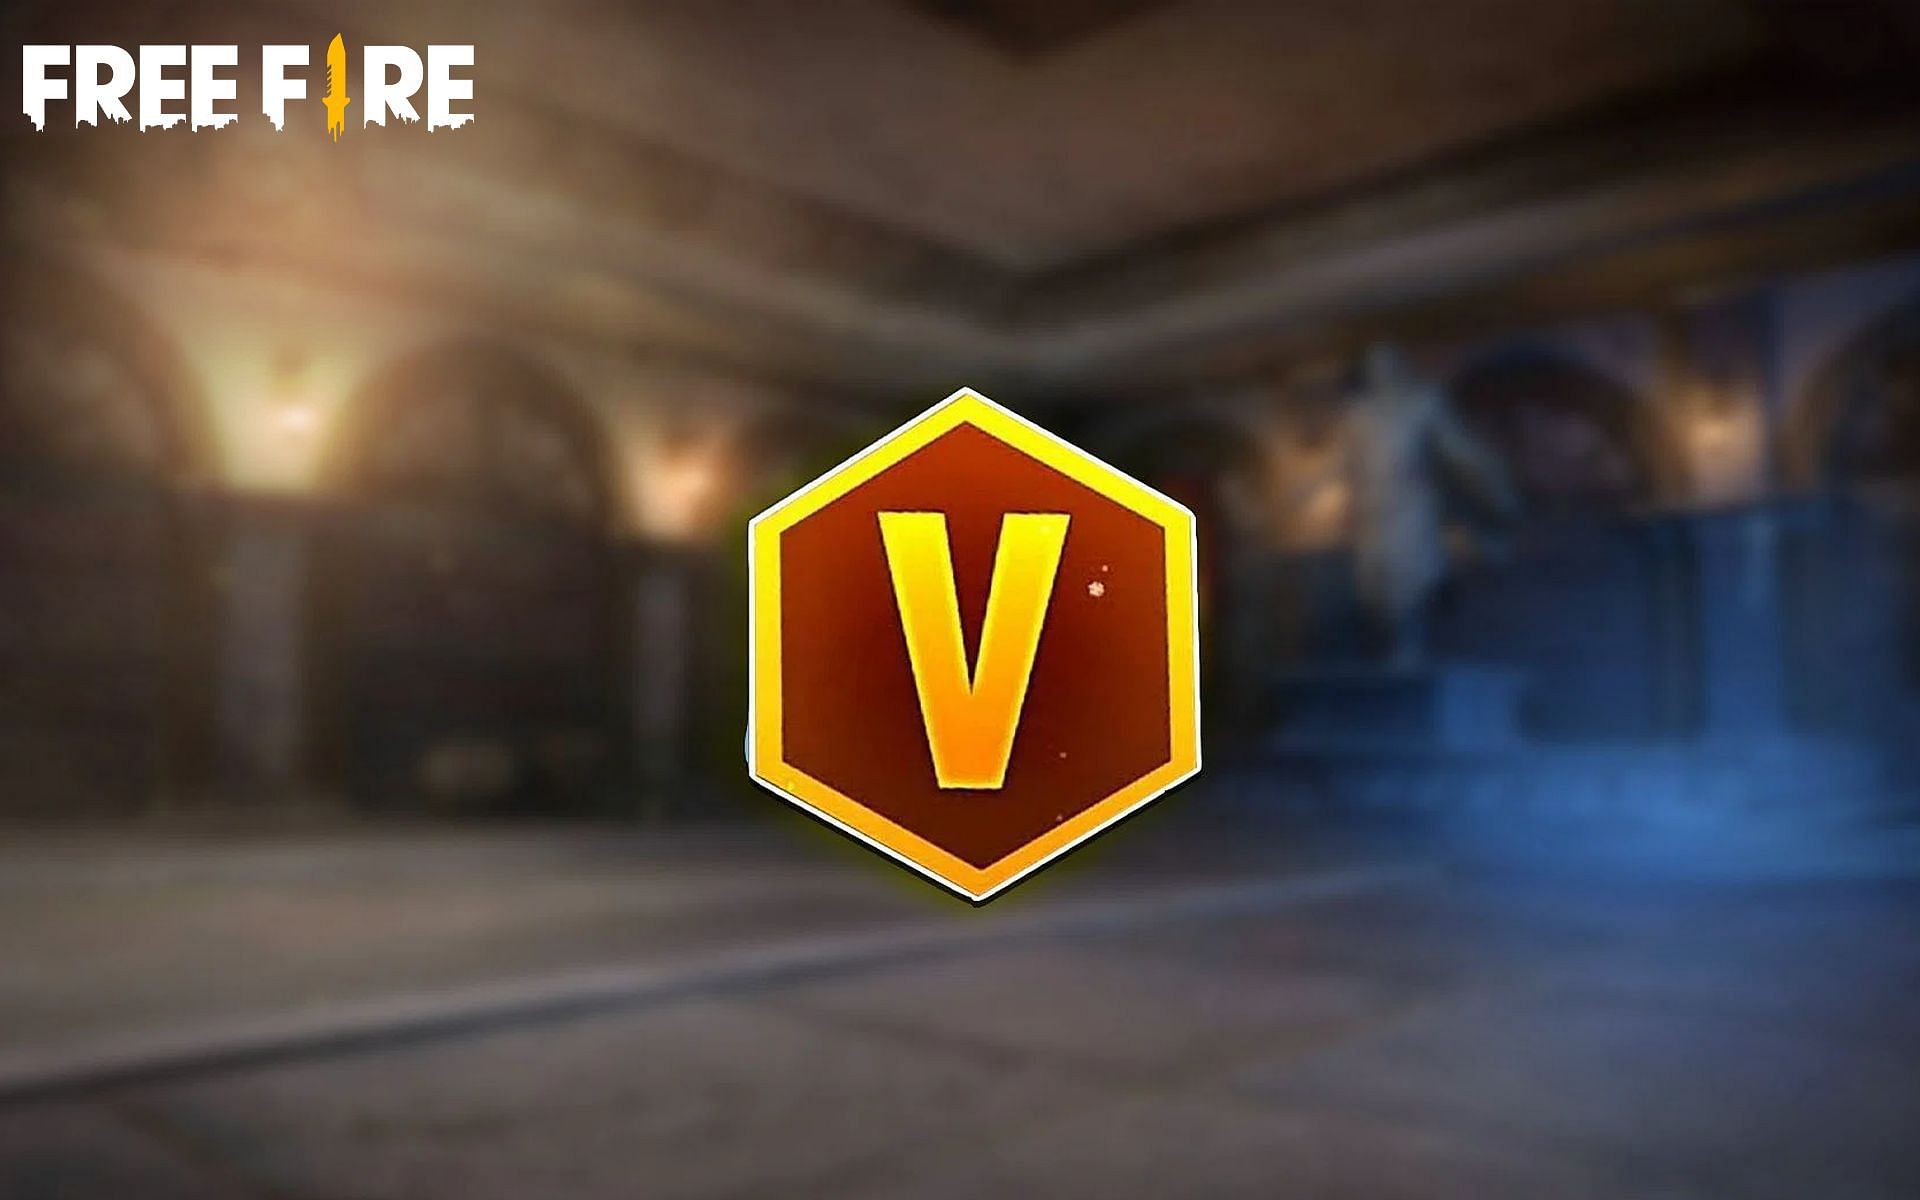 V Badge is given only to the partners (Image via Garena)